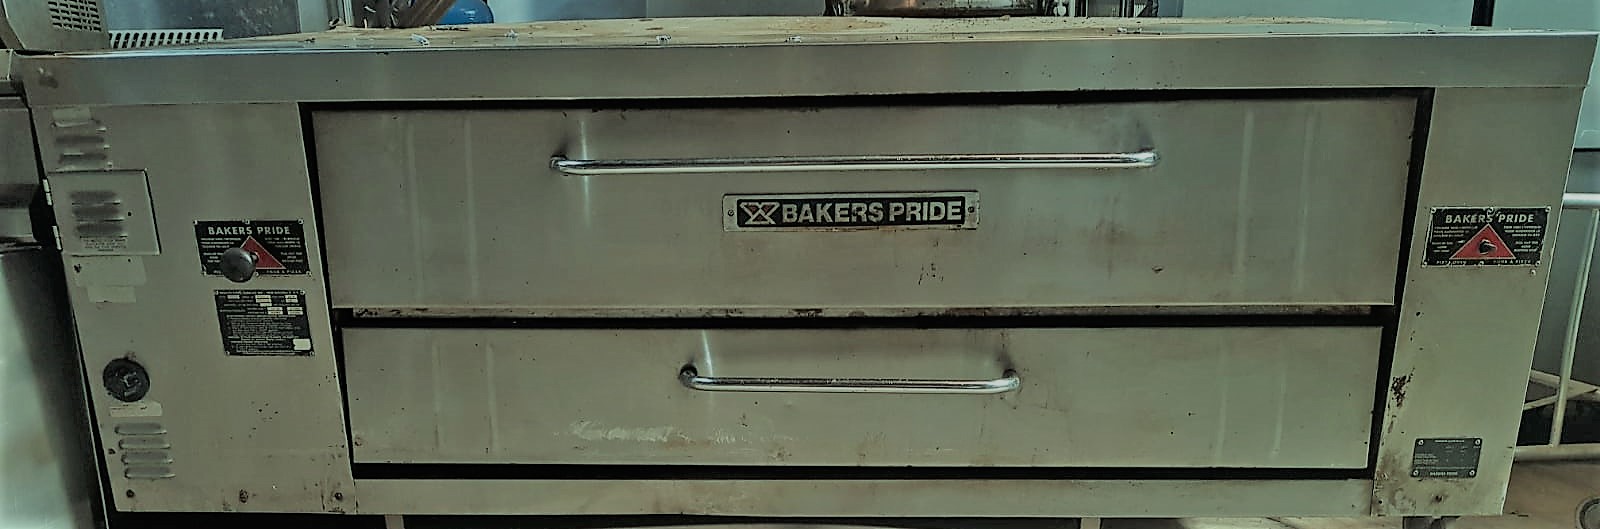 BAKERS PRIDE Single Deck Gas Bakers/Pizza Oven